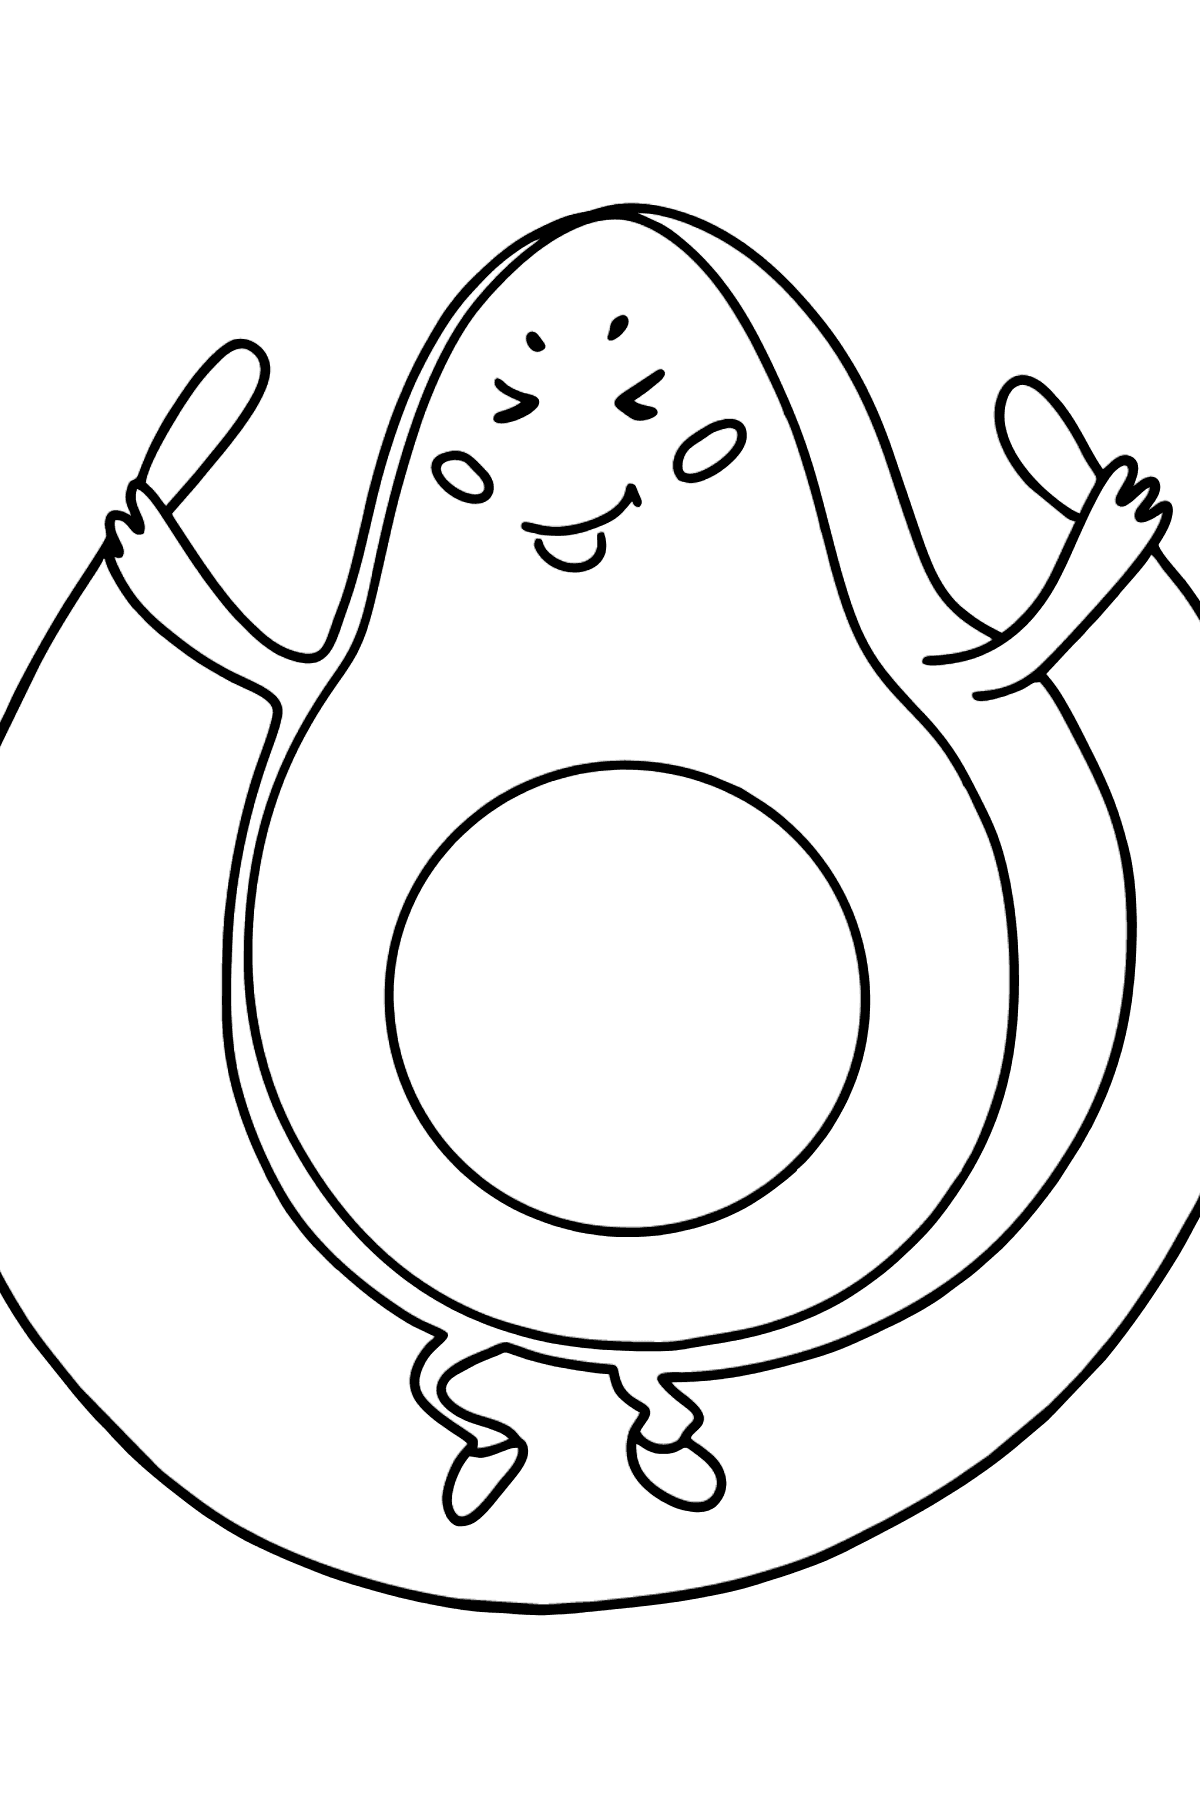 Avocado Gymnast coloring page - Coloring Pages for Kids